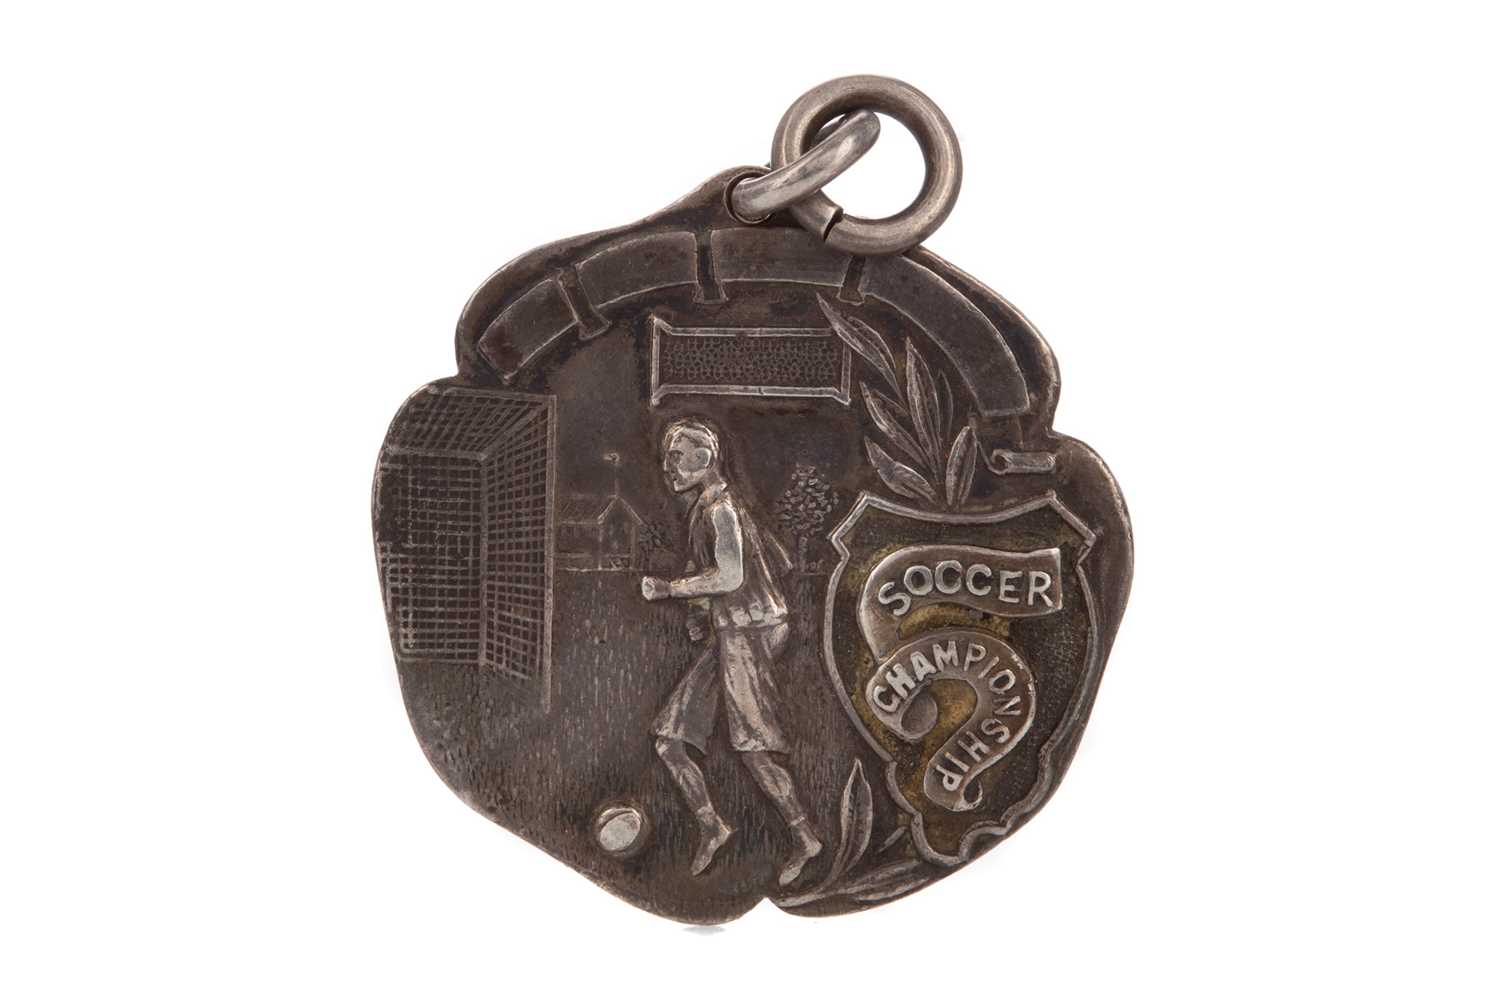 Lot 1751 - A SOCCER CHAMPIONSHIP SILVER MEDAL 1925/26